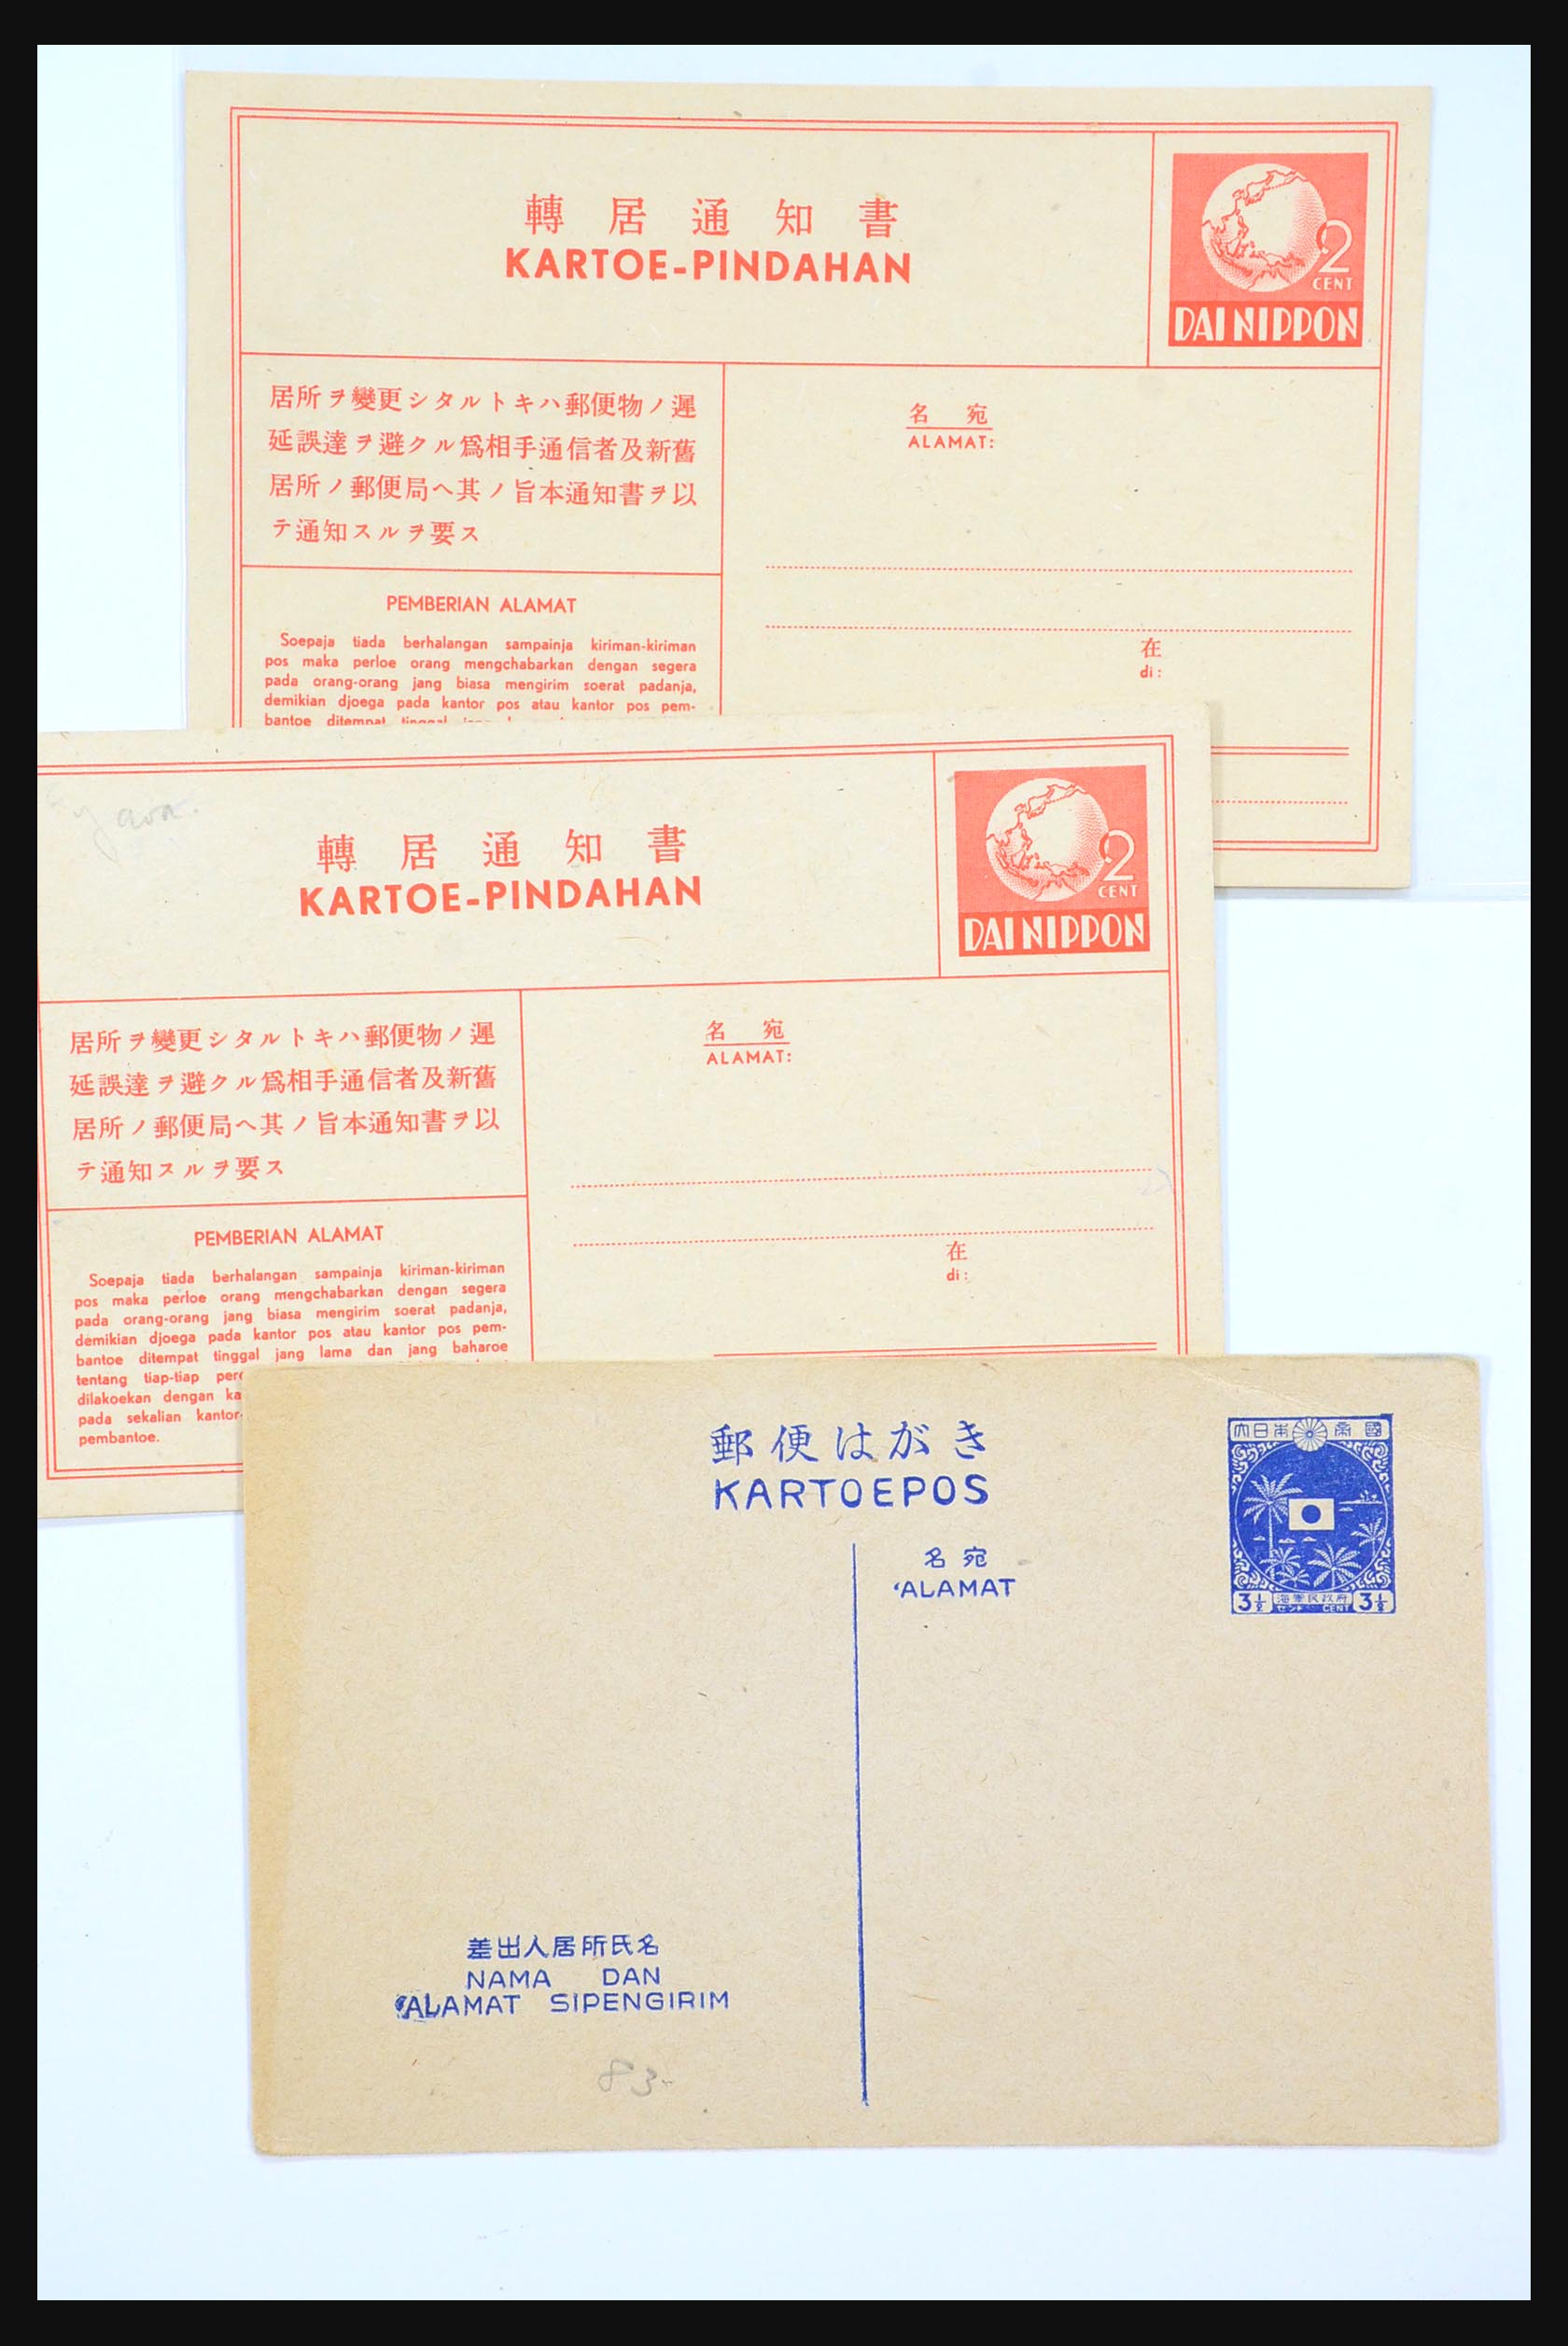 31362 062 - 31362 Netherlands Indies Japanese occupation covers 1942-1945.